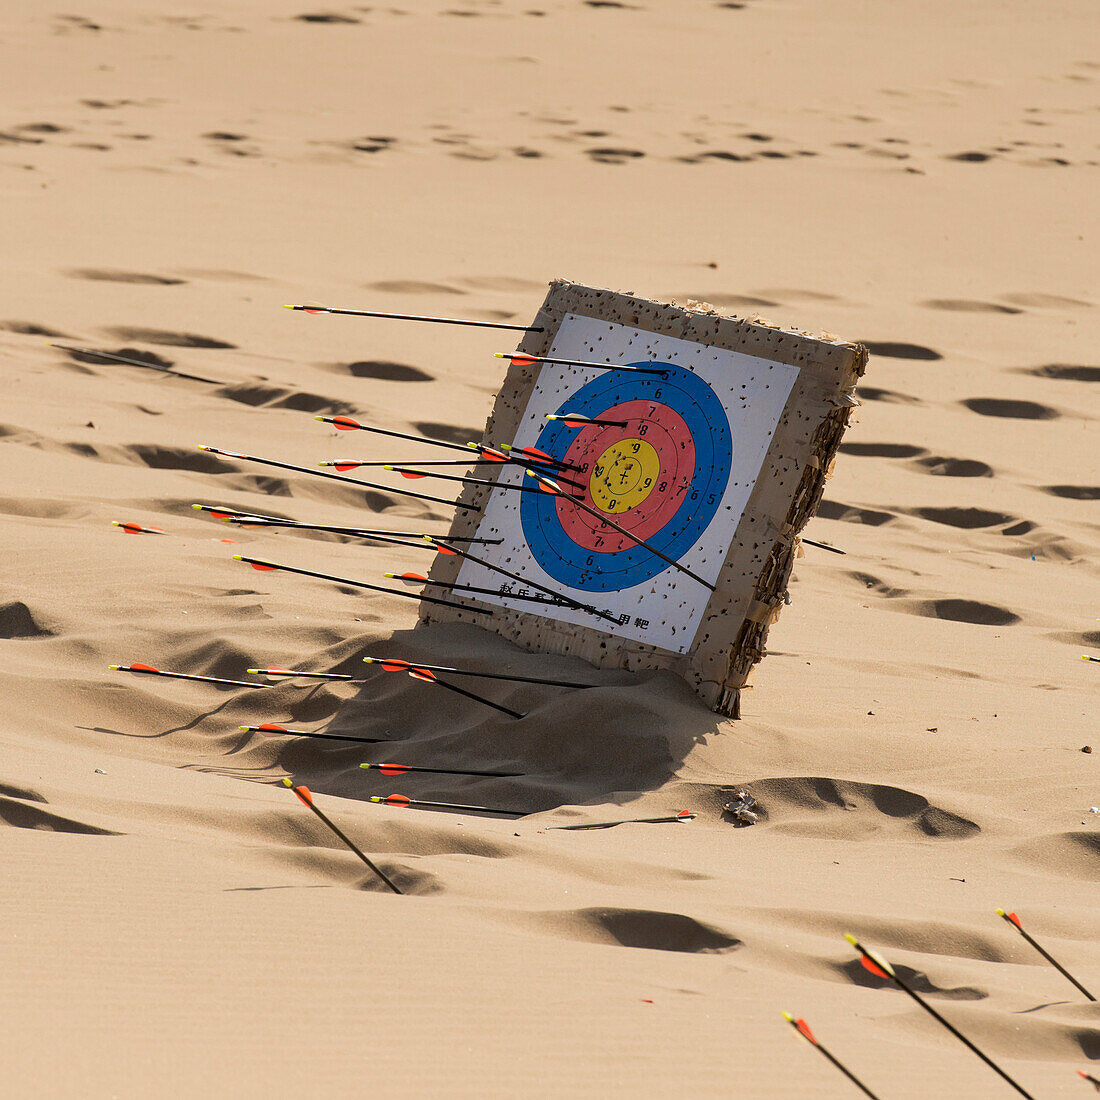 Arrows stuck in a target on the sand